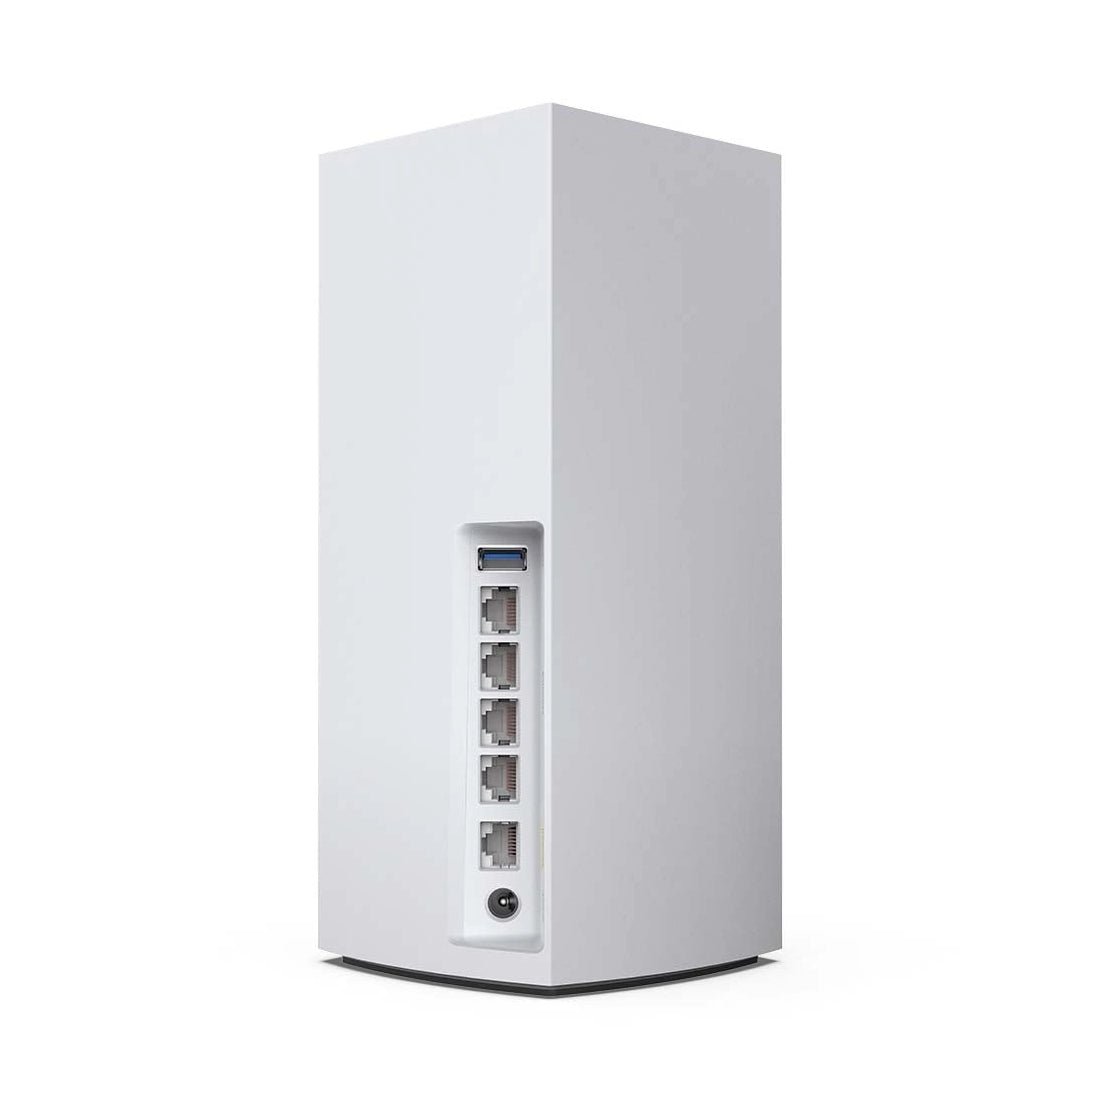 Linksys MX5300 Velop AX Whole Home WiFi 6 Wireless Router - راوتر لاسلكي - Store 974 | ستور ٩٧٤